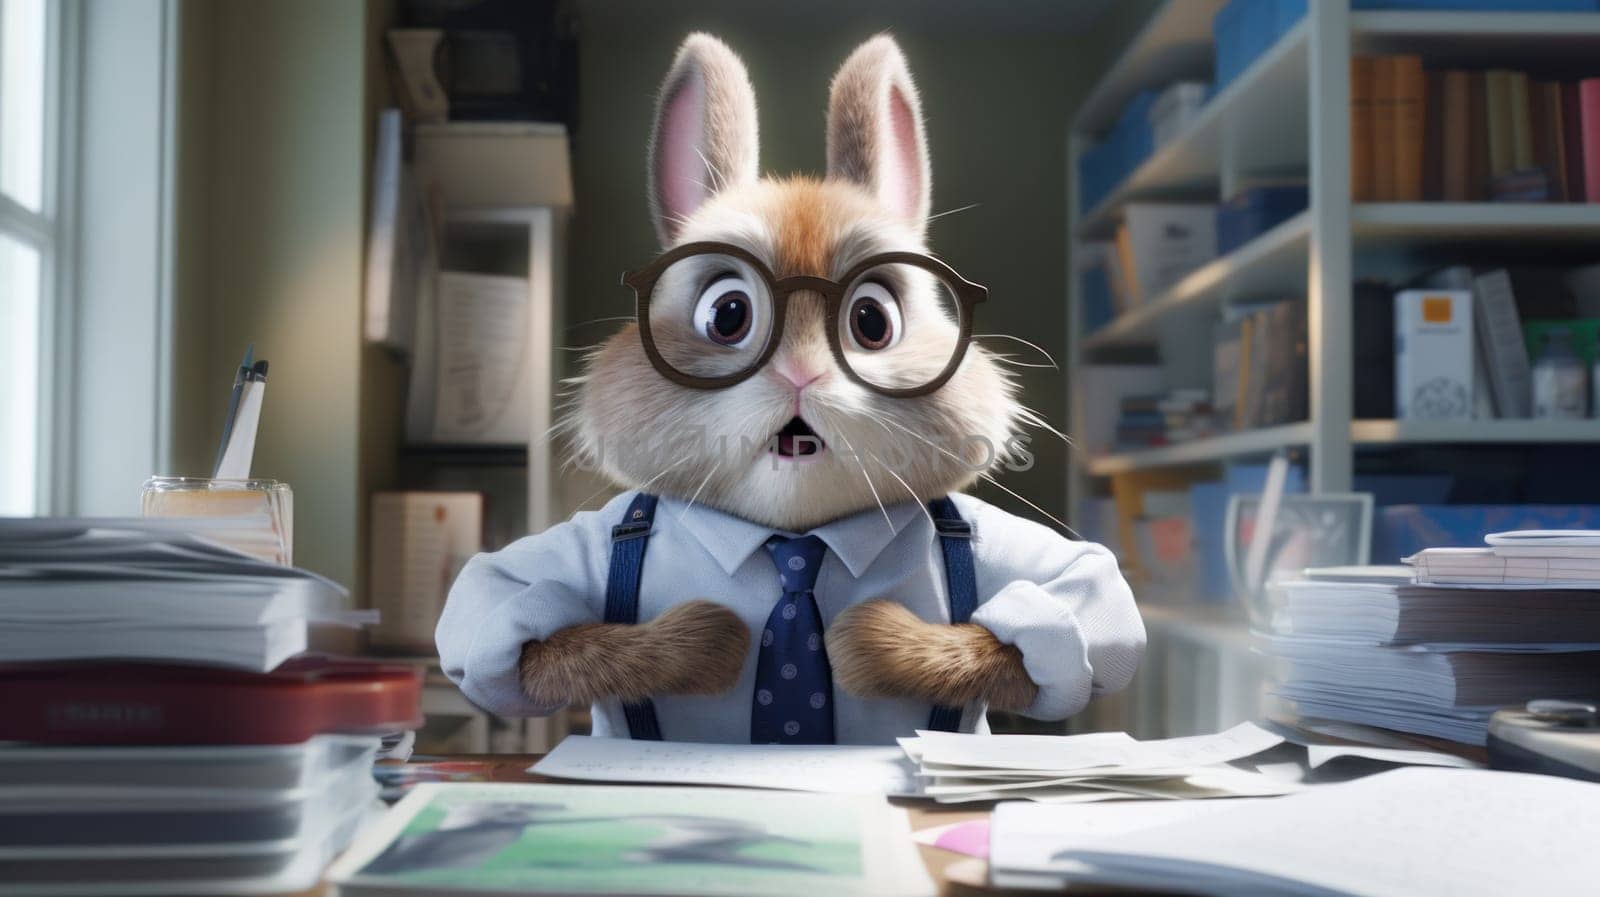 A rabbit in glasses and a tie sitting at a desk, AI by starush